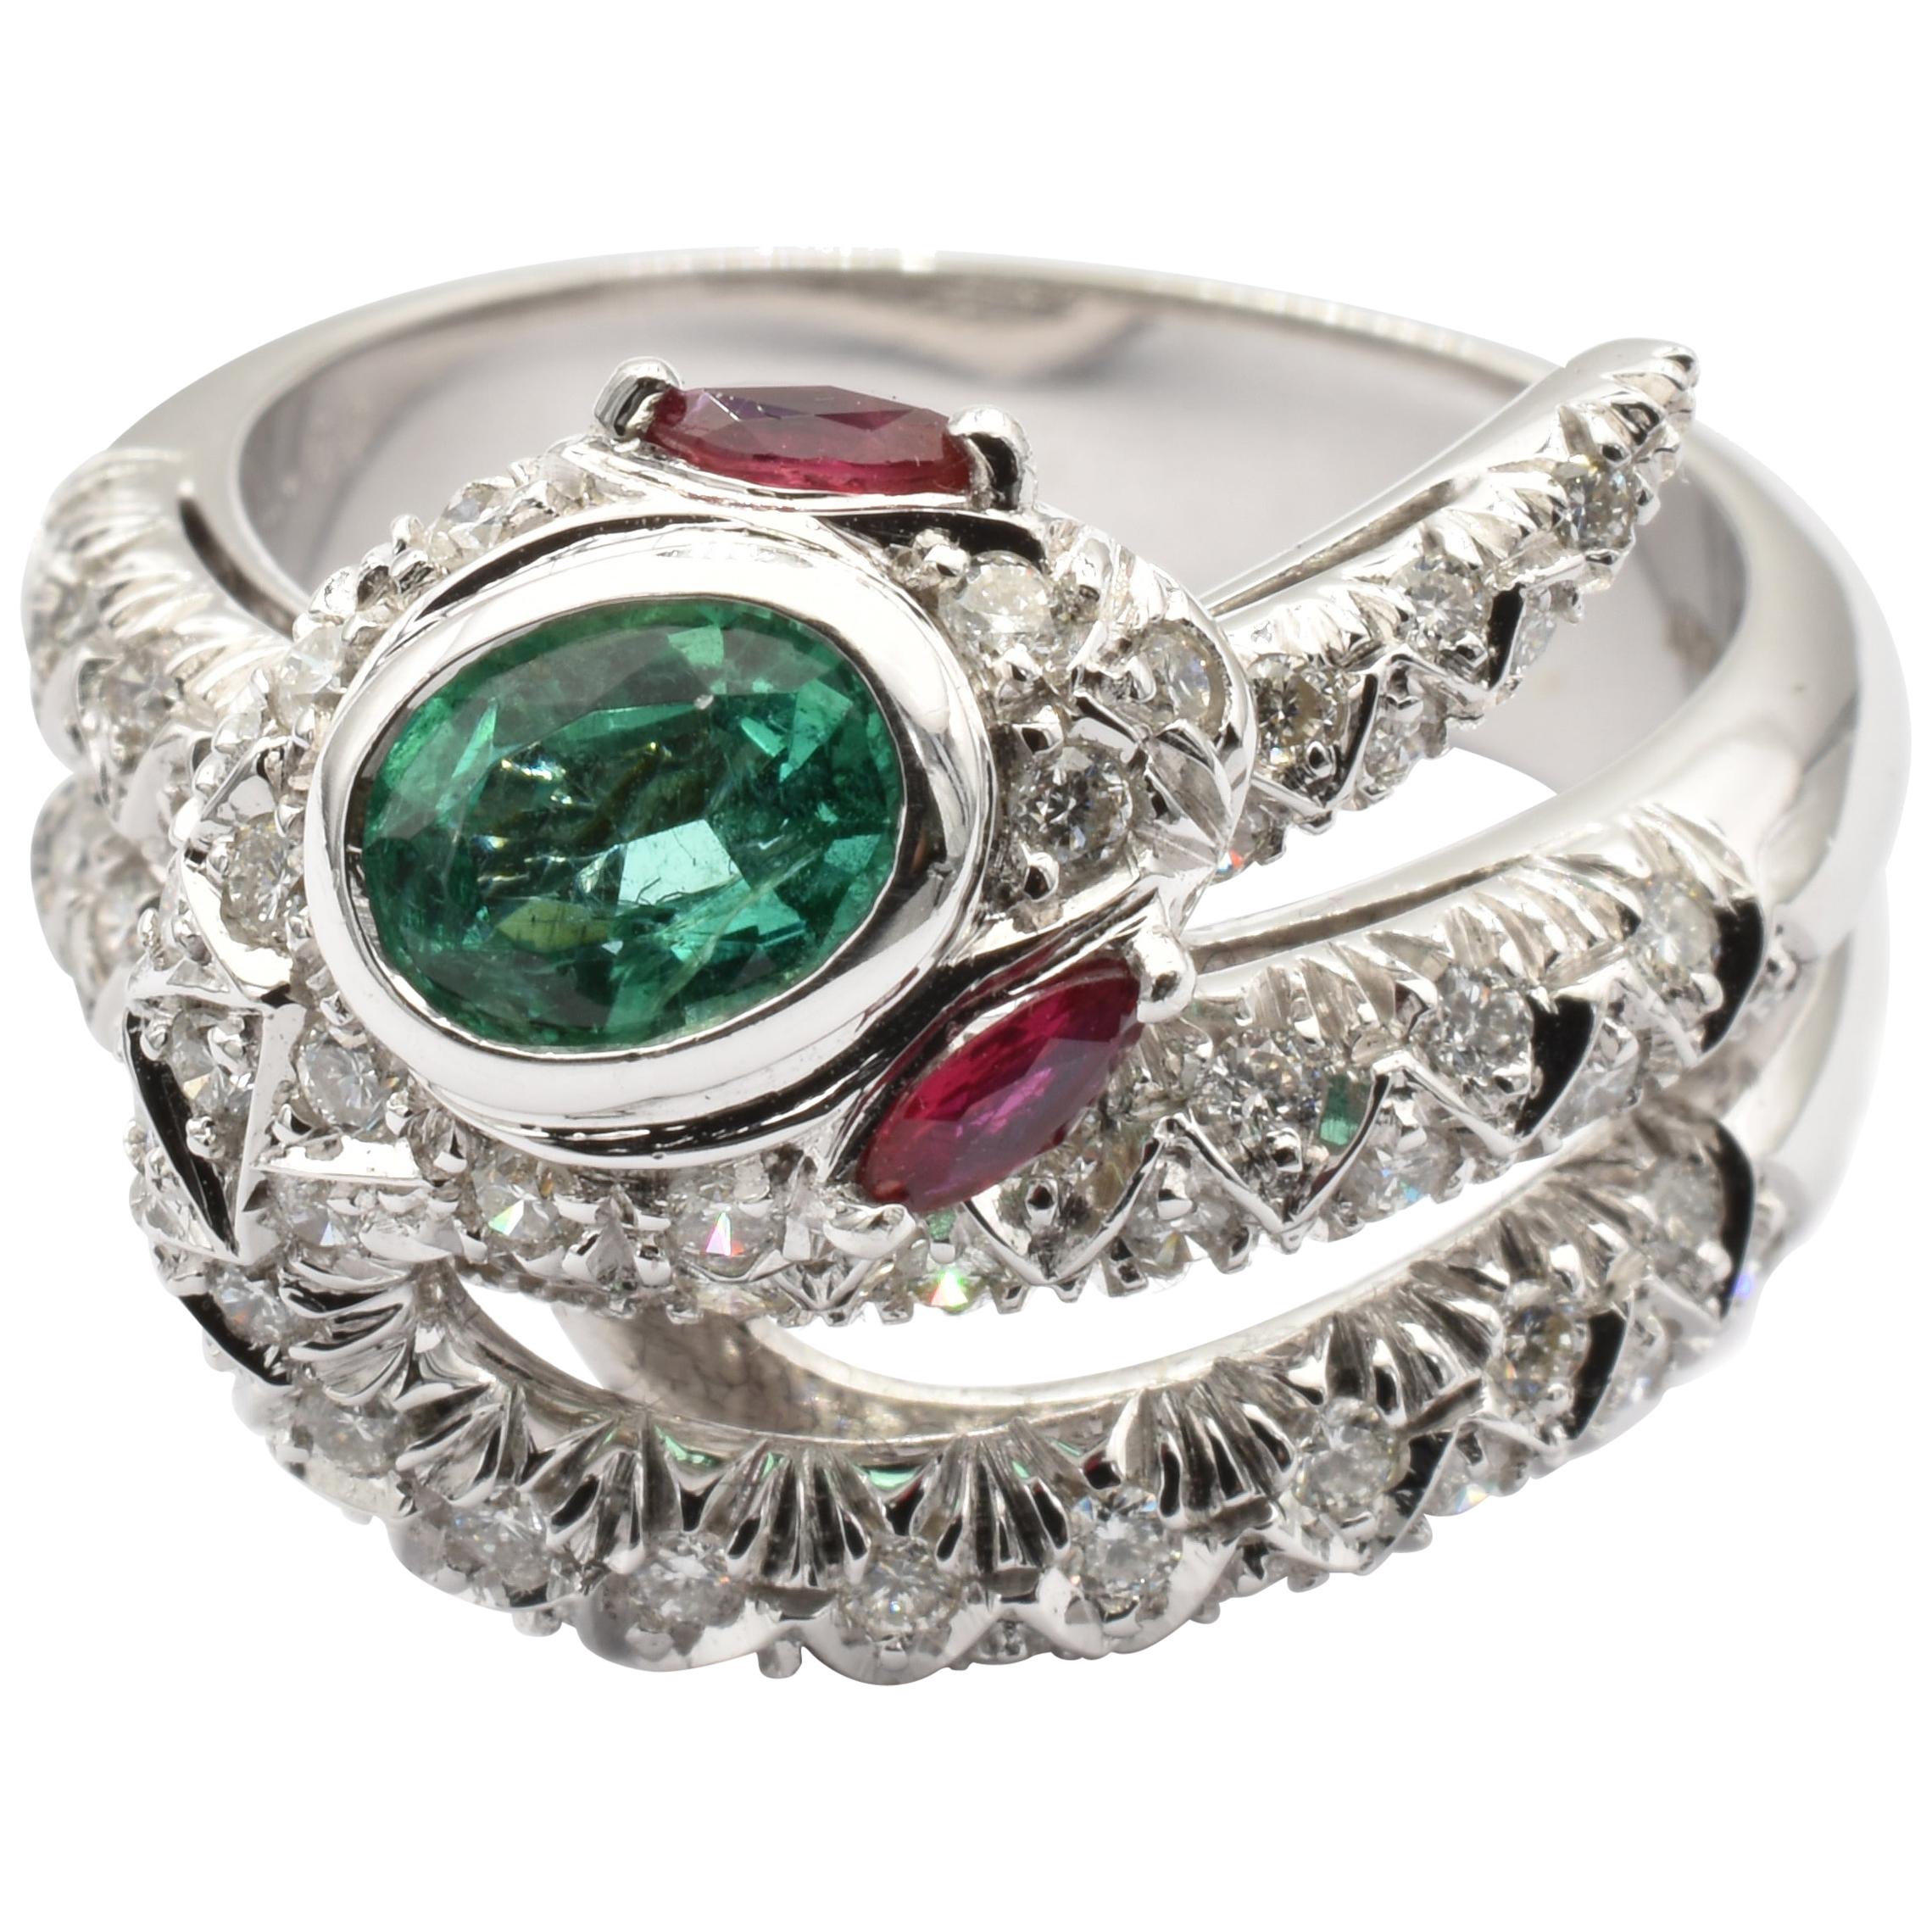 Emerald, Rubies and Diamonds White Gold Snake Ring Made in Italy